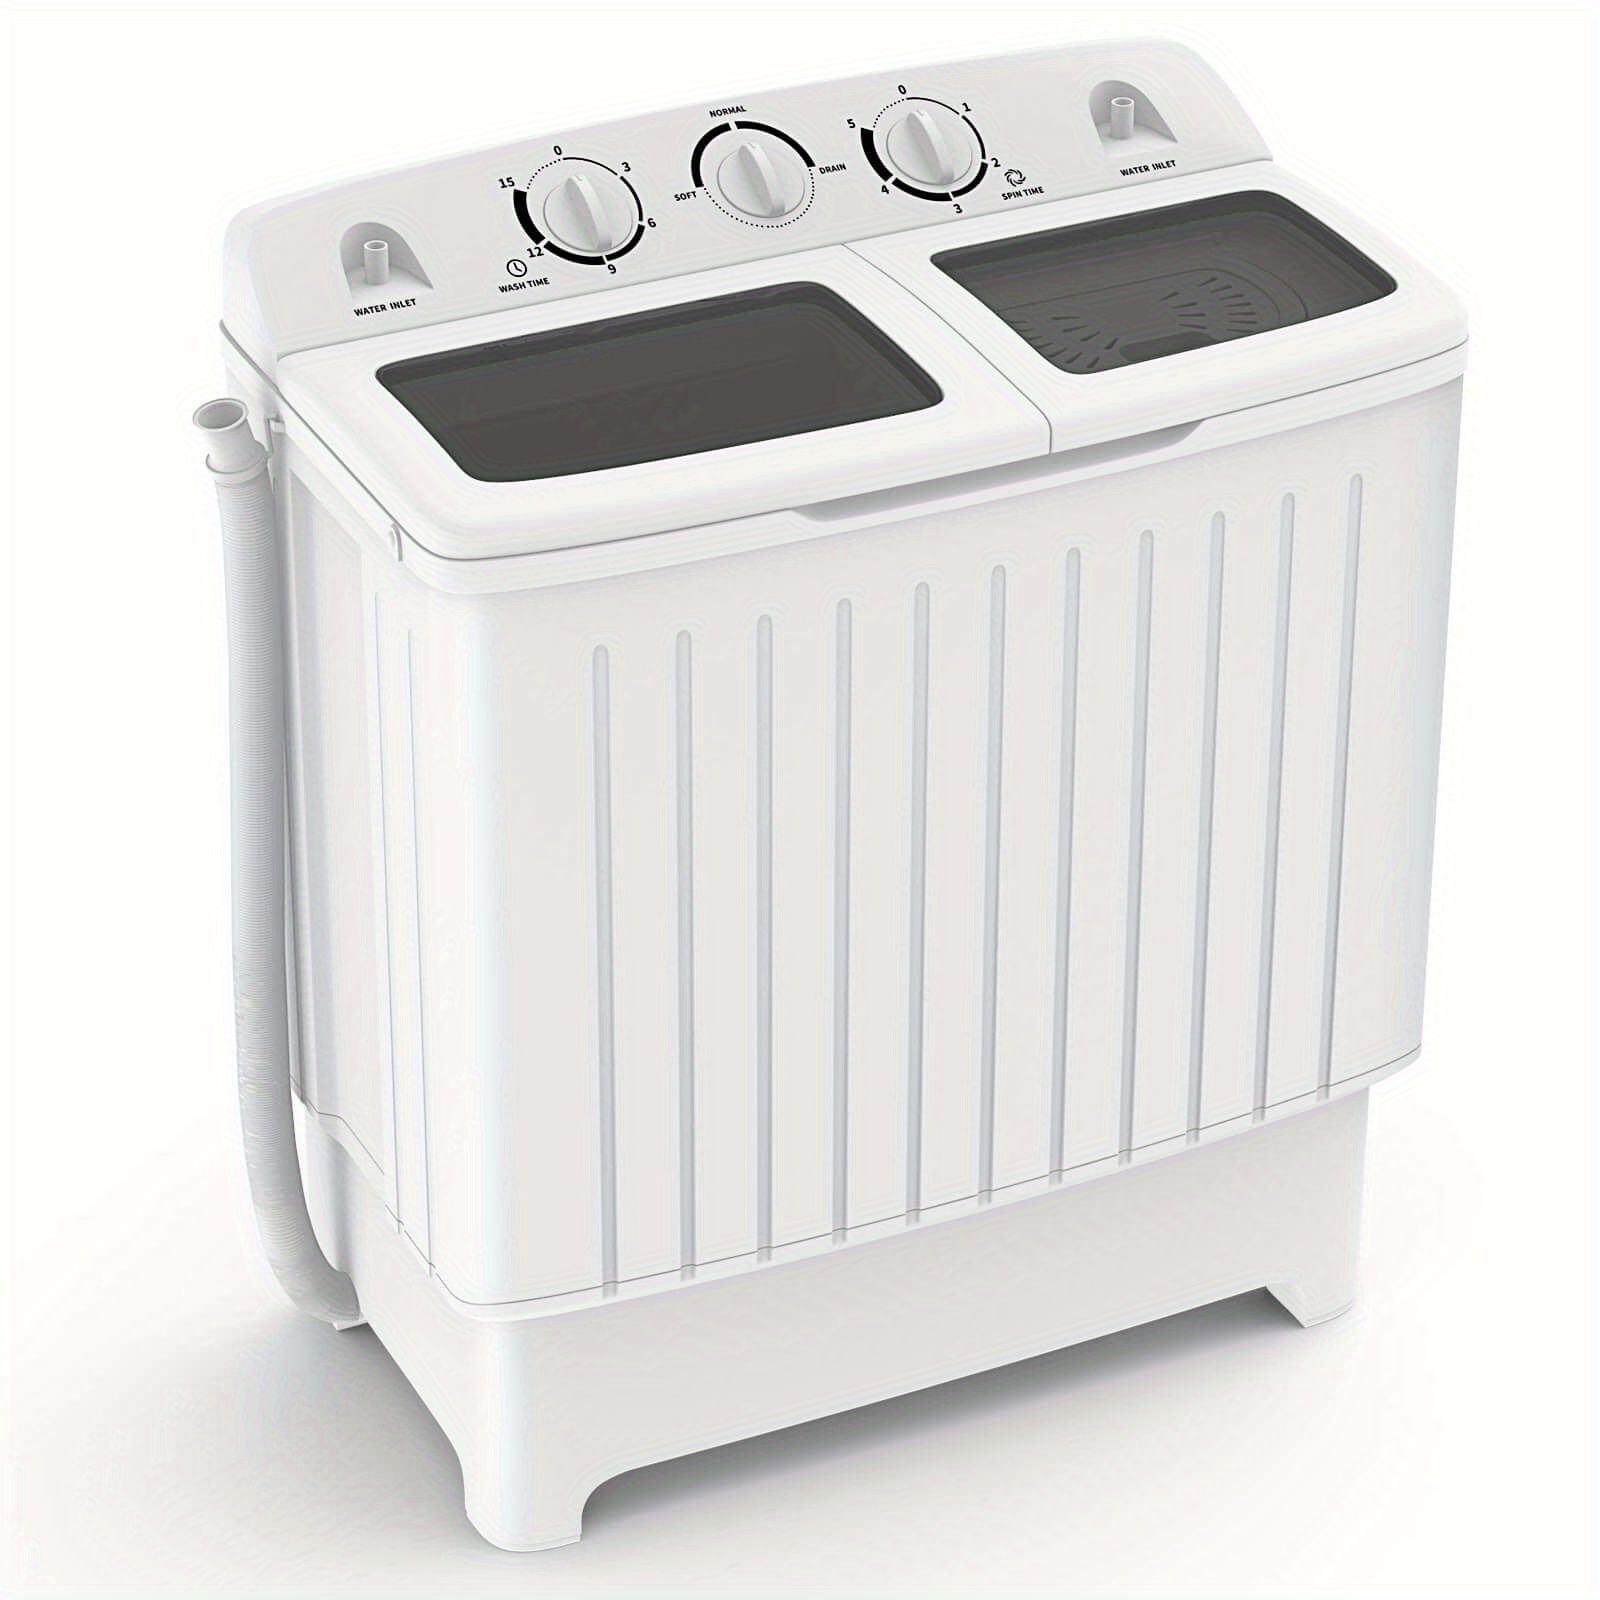 

Twin Tub Compact Laundry Washer W/20 Lbs Capacity